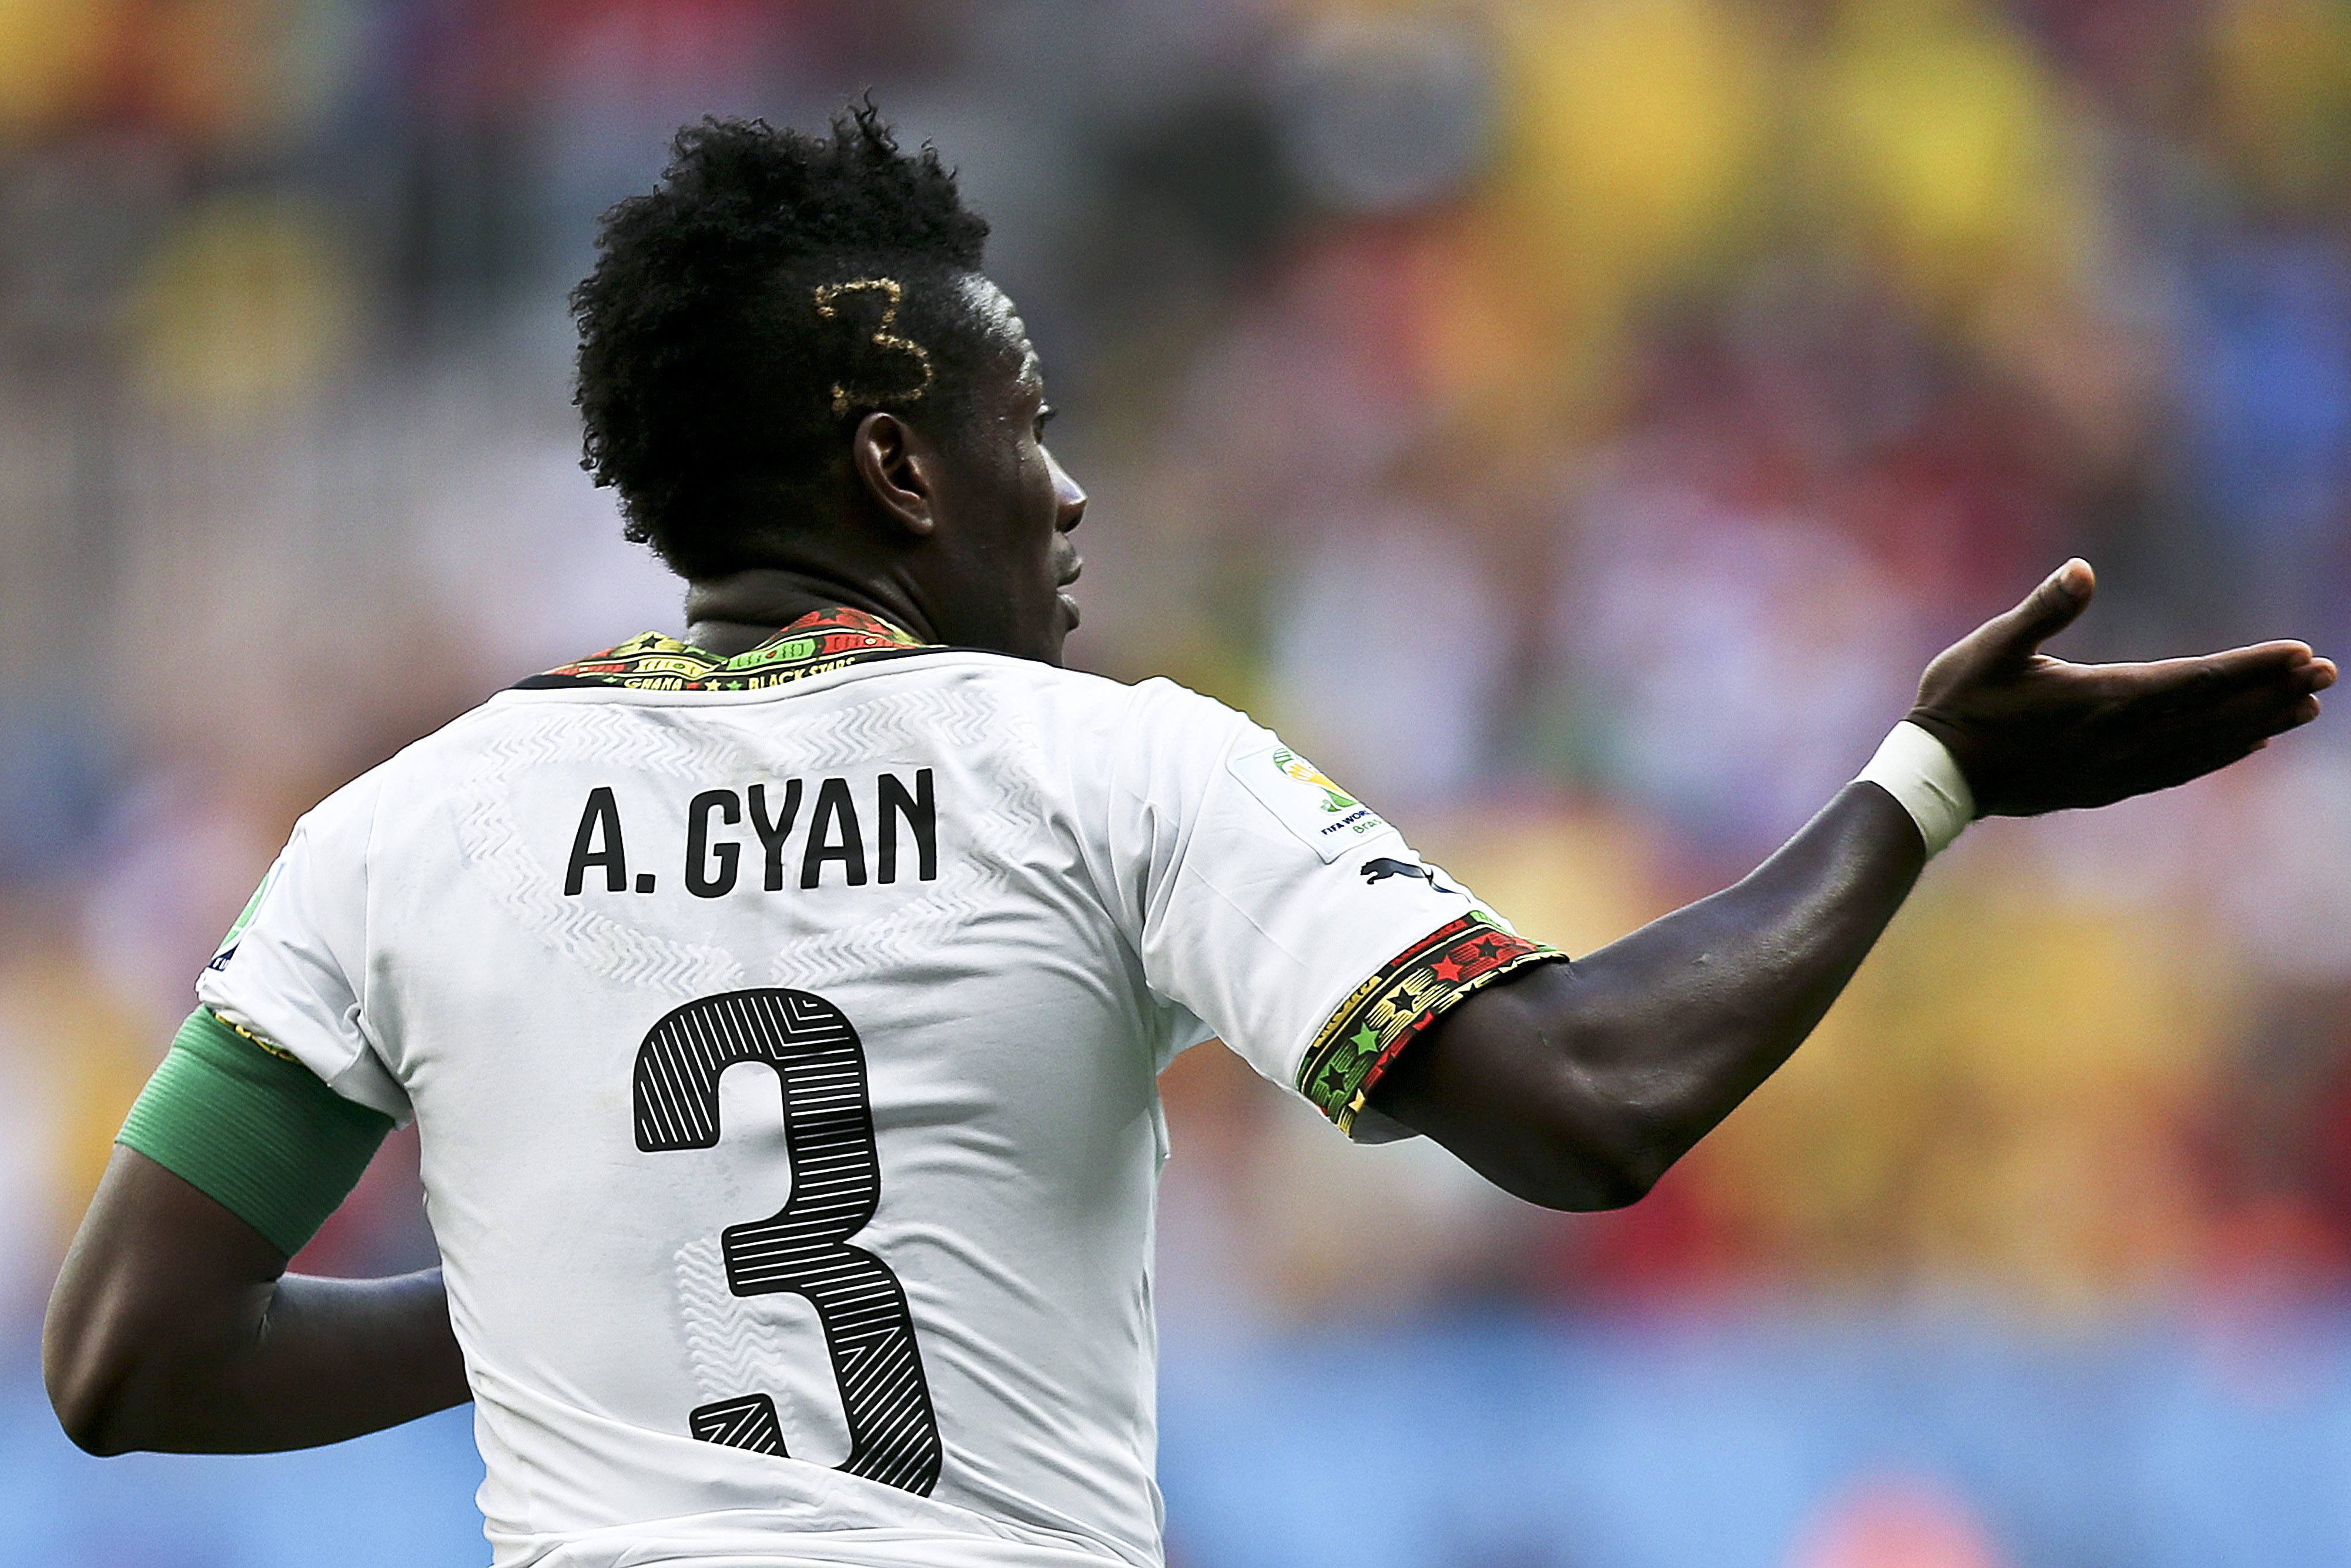 Ghana player Asamoah Gyan celebrates a goal against Portugal during the match between Portugal and Ghana at the Estadio Nacional in Brasilia, Brazil on June 26, 2014.